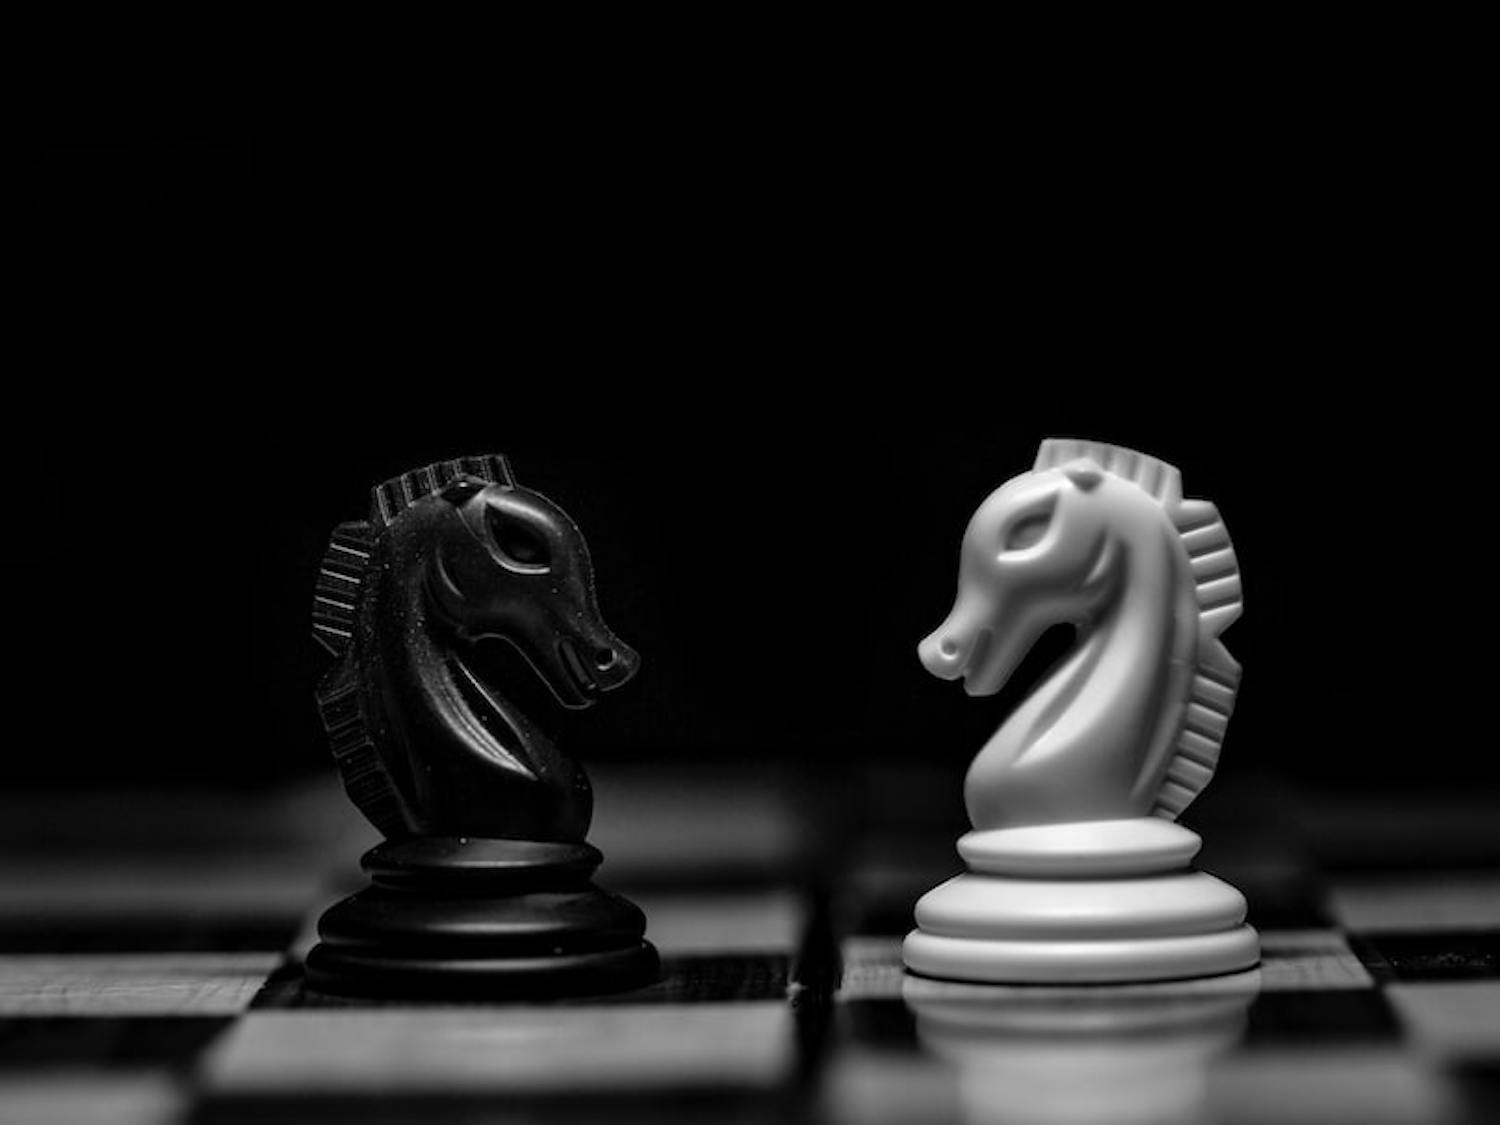 Opposing knights on a chessboard | Source: Hassan Pasha on Unsplash